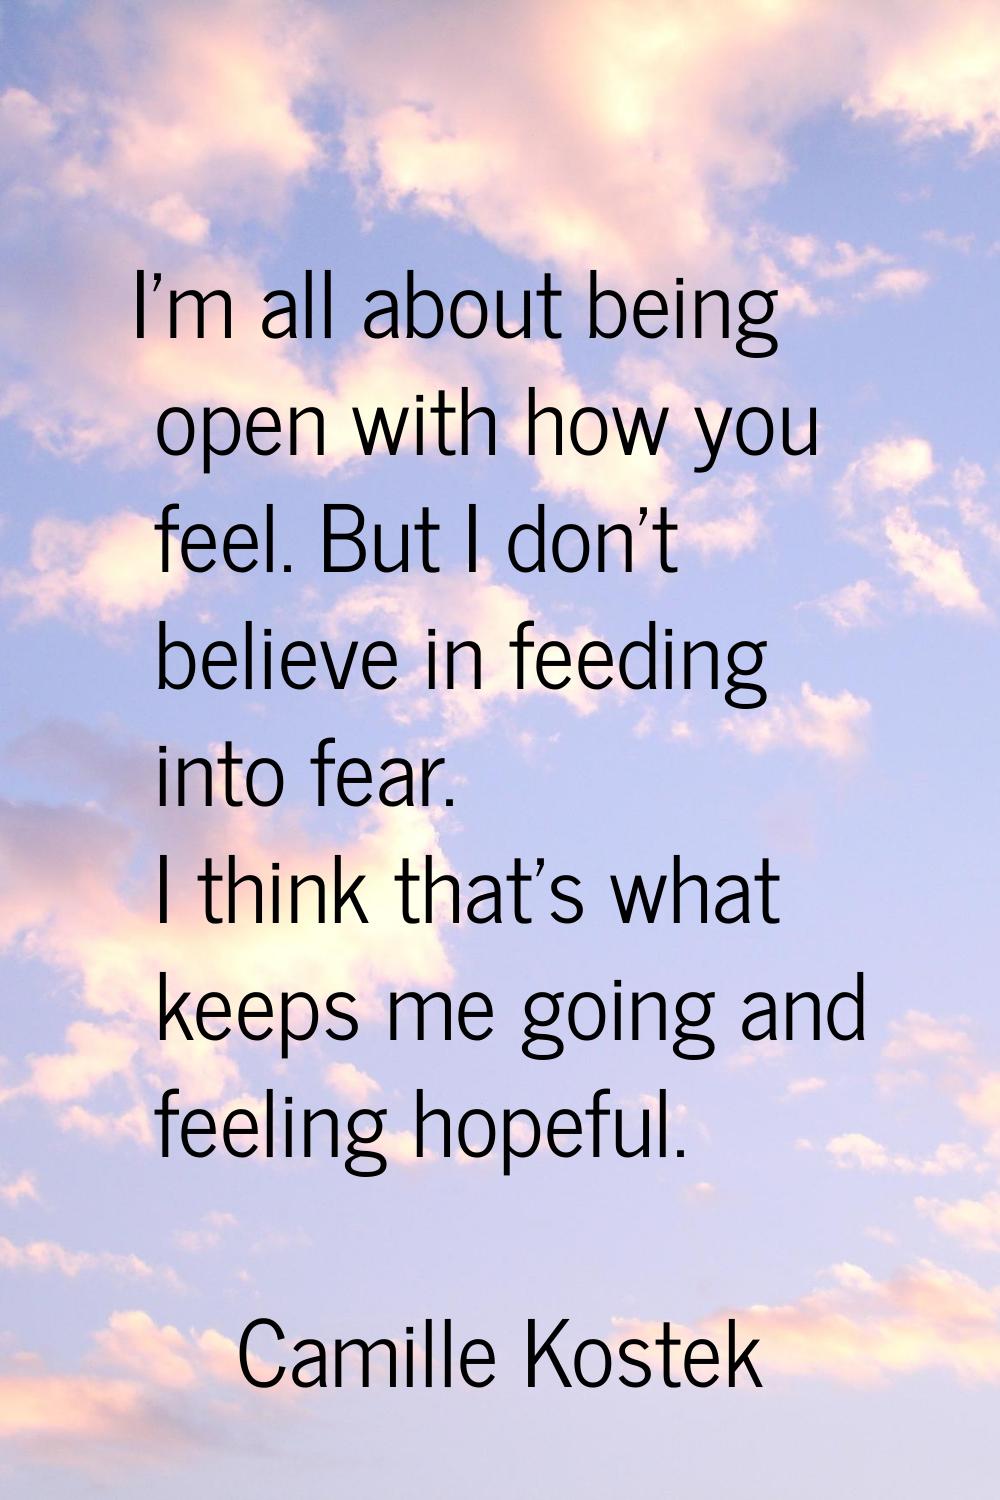 I'm all about being open with how you feel. But I don't believe in feeding into fear. I think that'